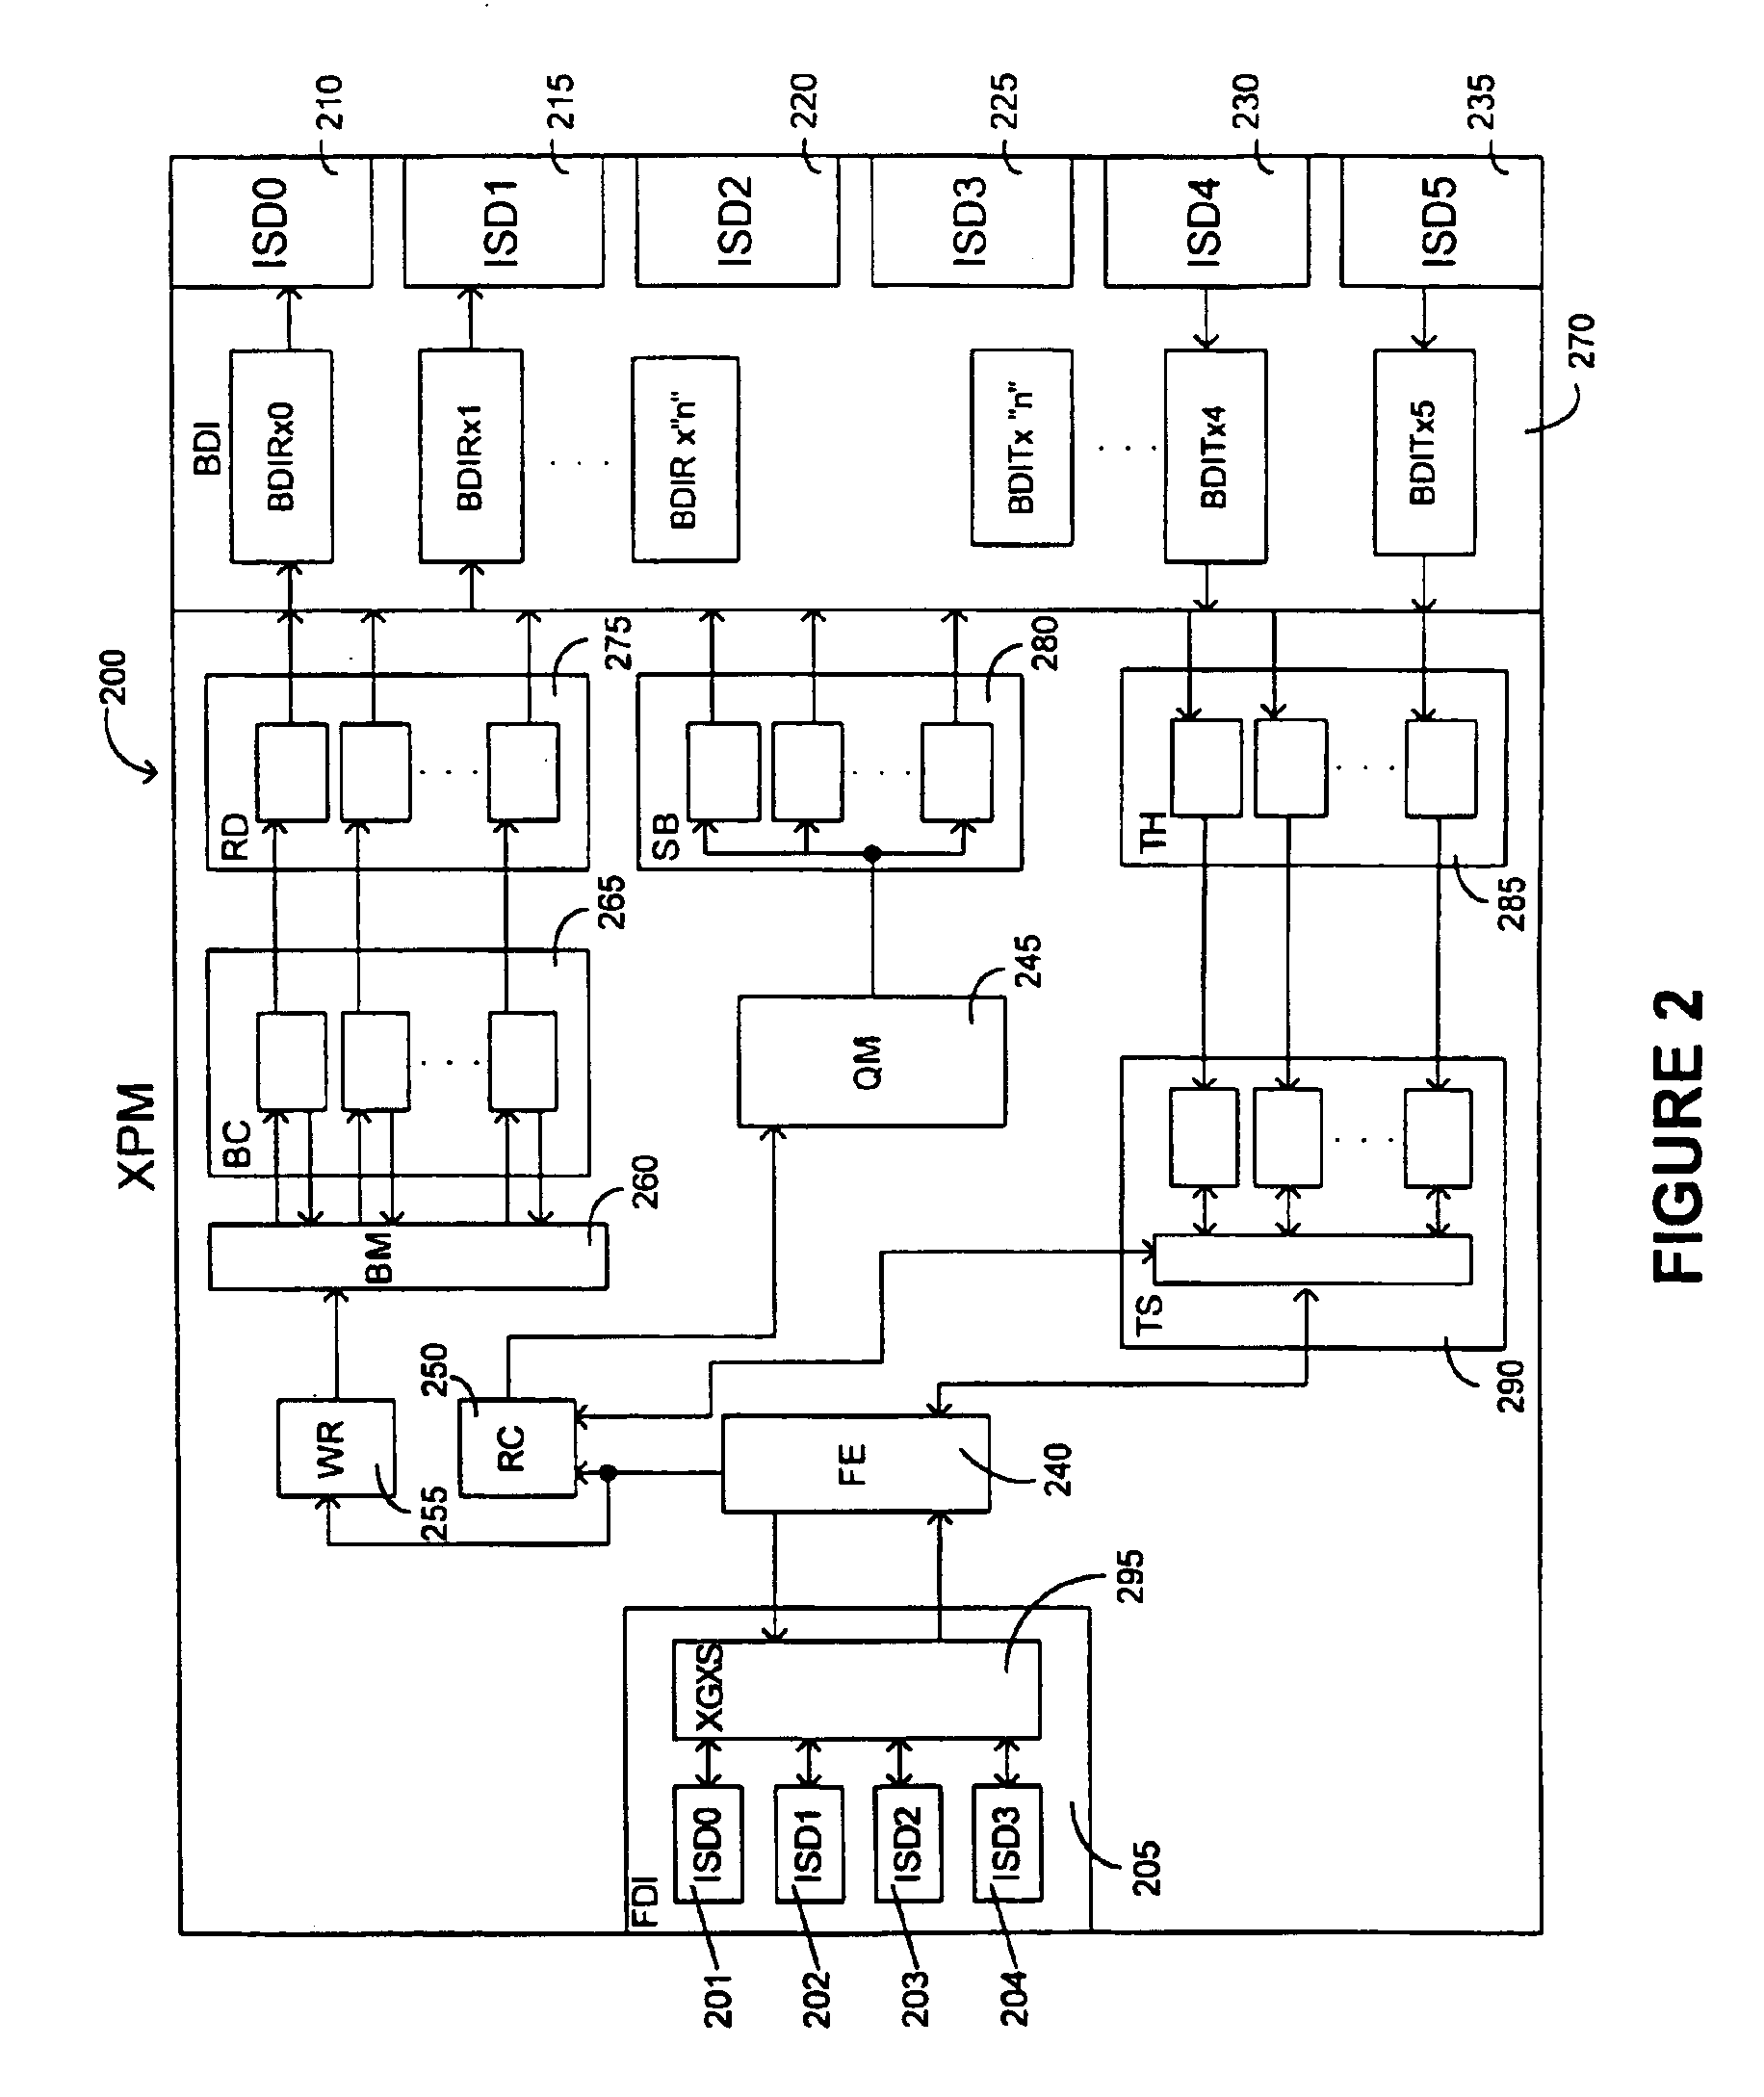 Method and apparatus for providing optimized high speed link utilization